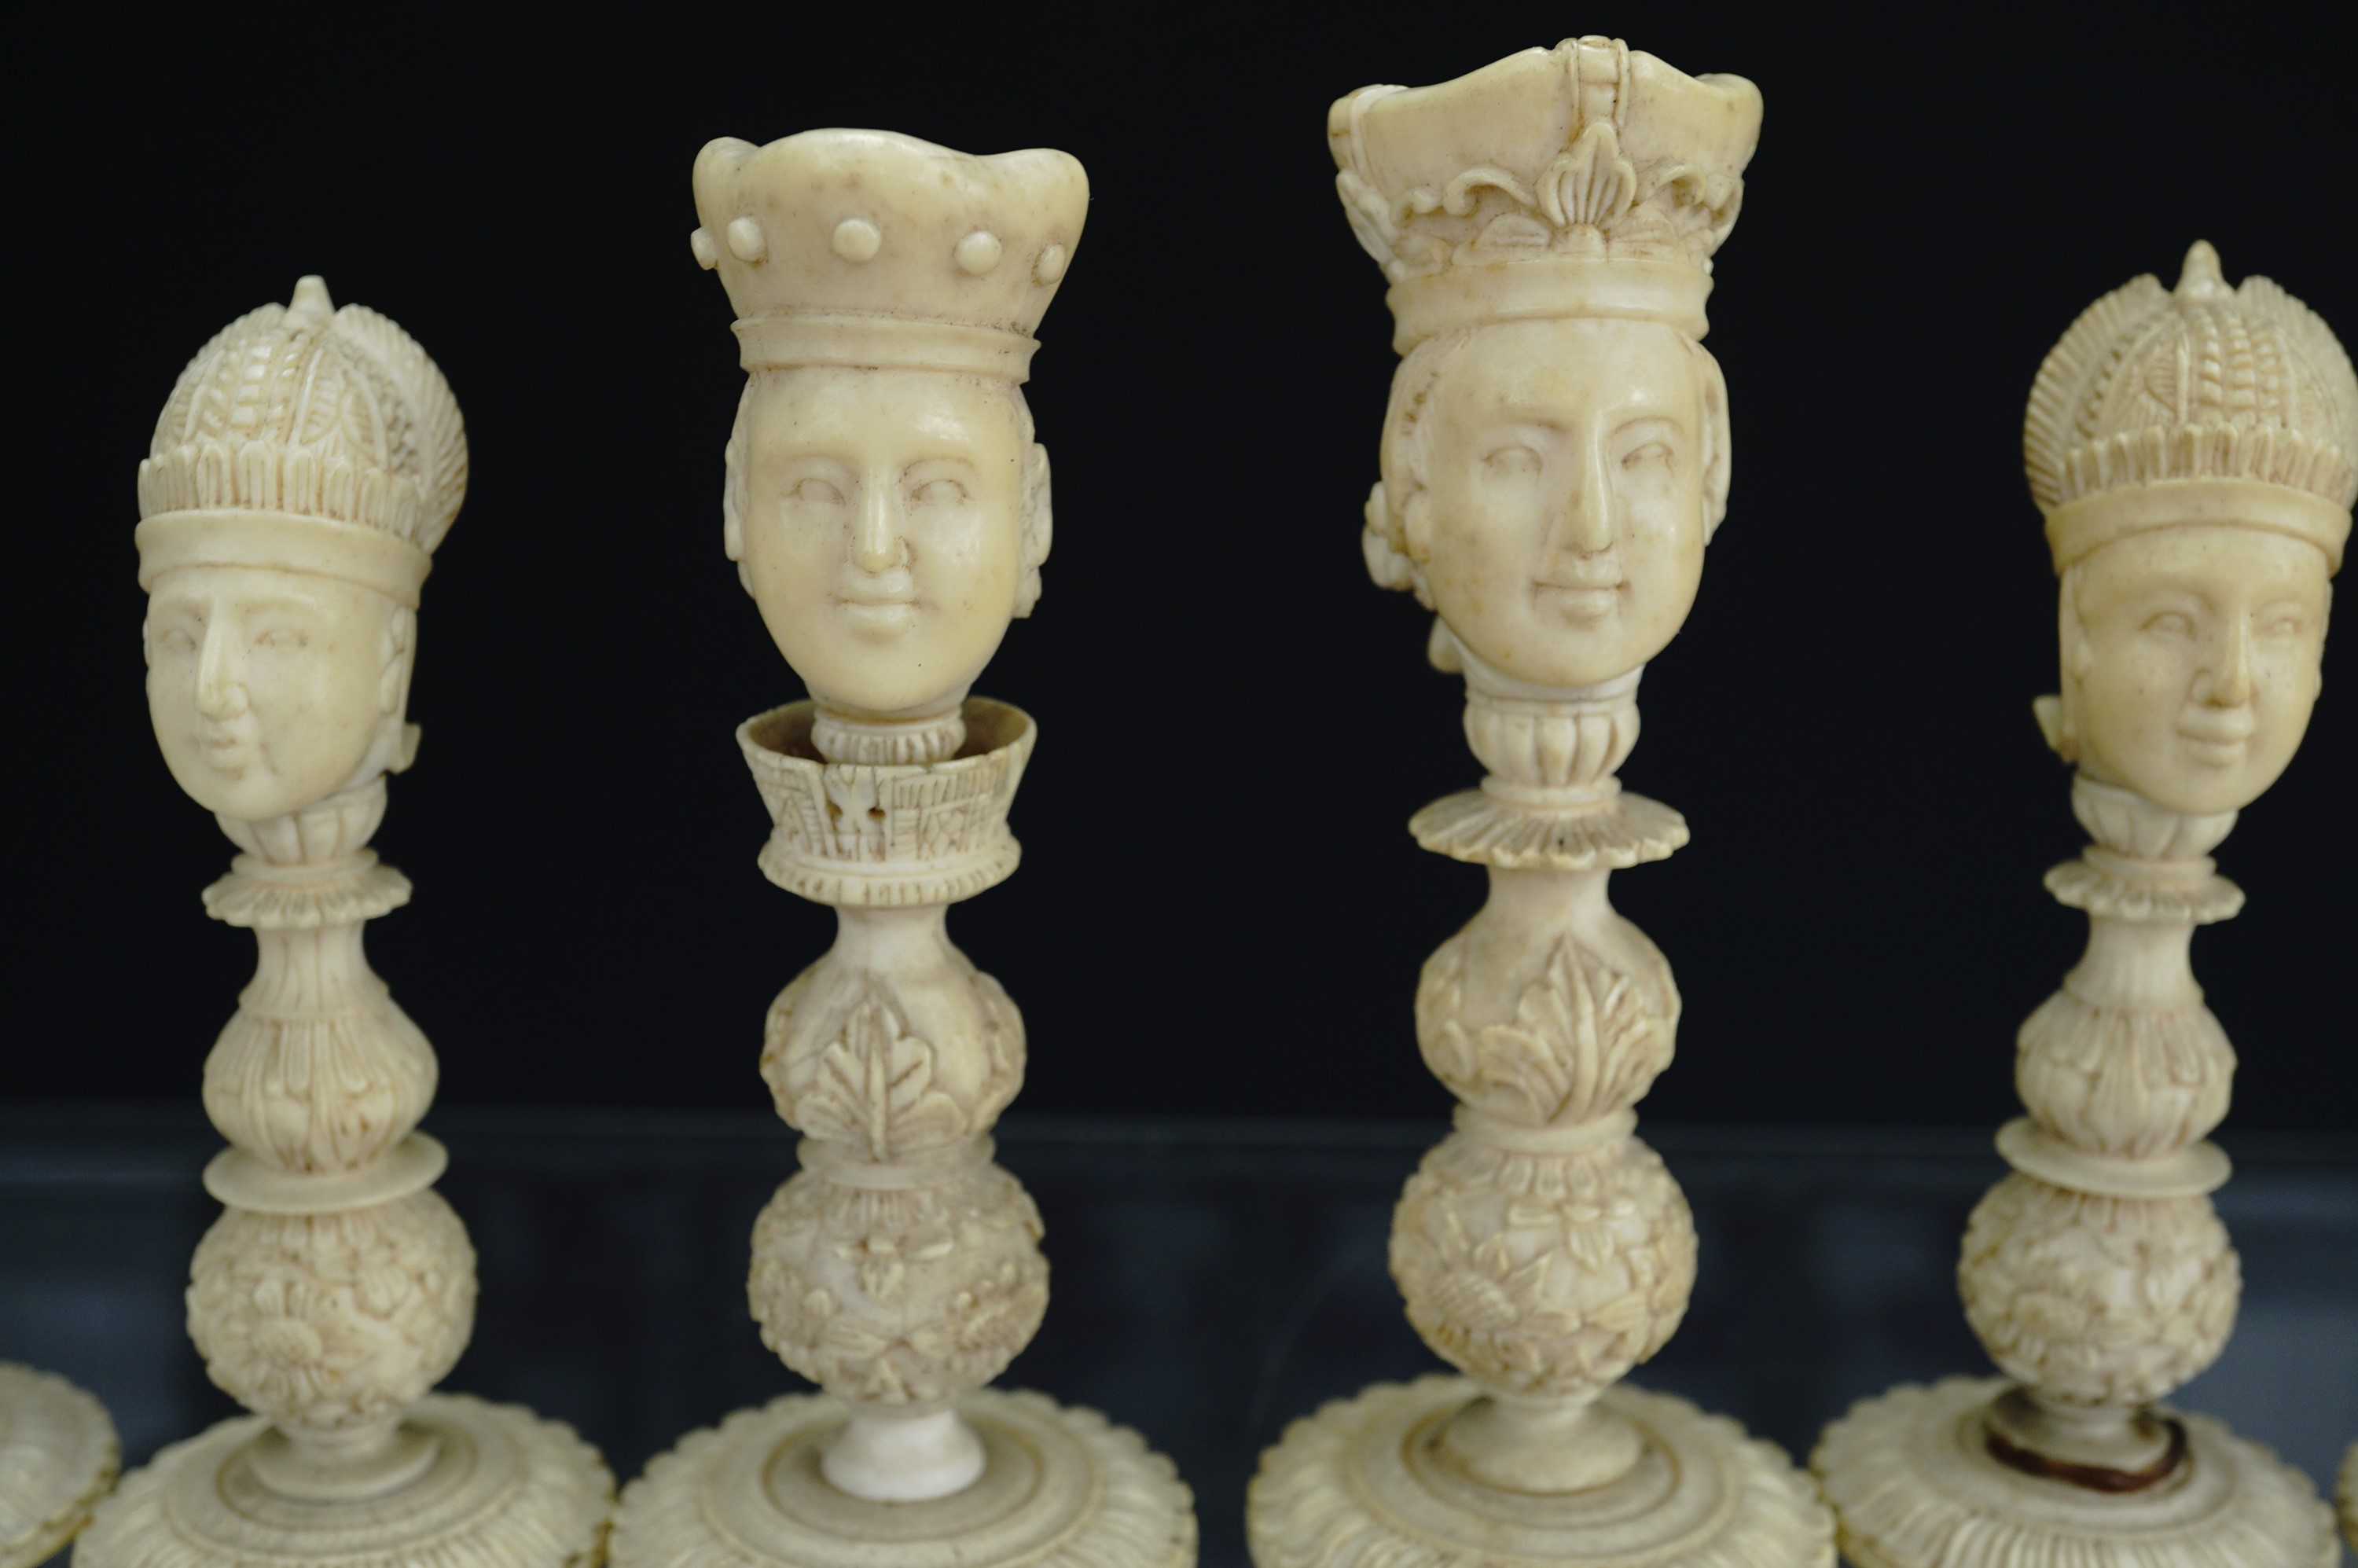 A late 18th / early 19th Century Chinese / Canton export ivory chess set, likely Macau, Kings - Image 7 of 7